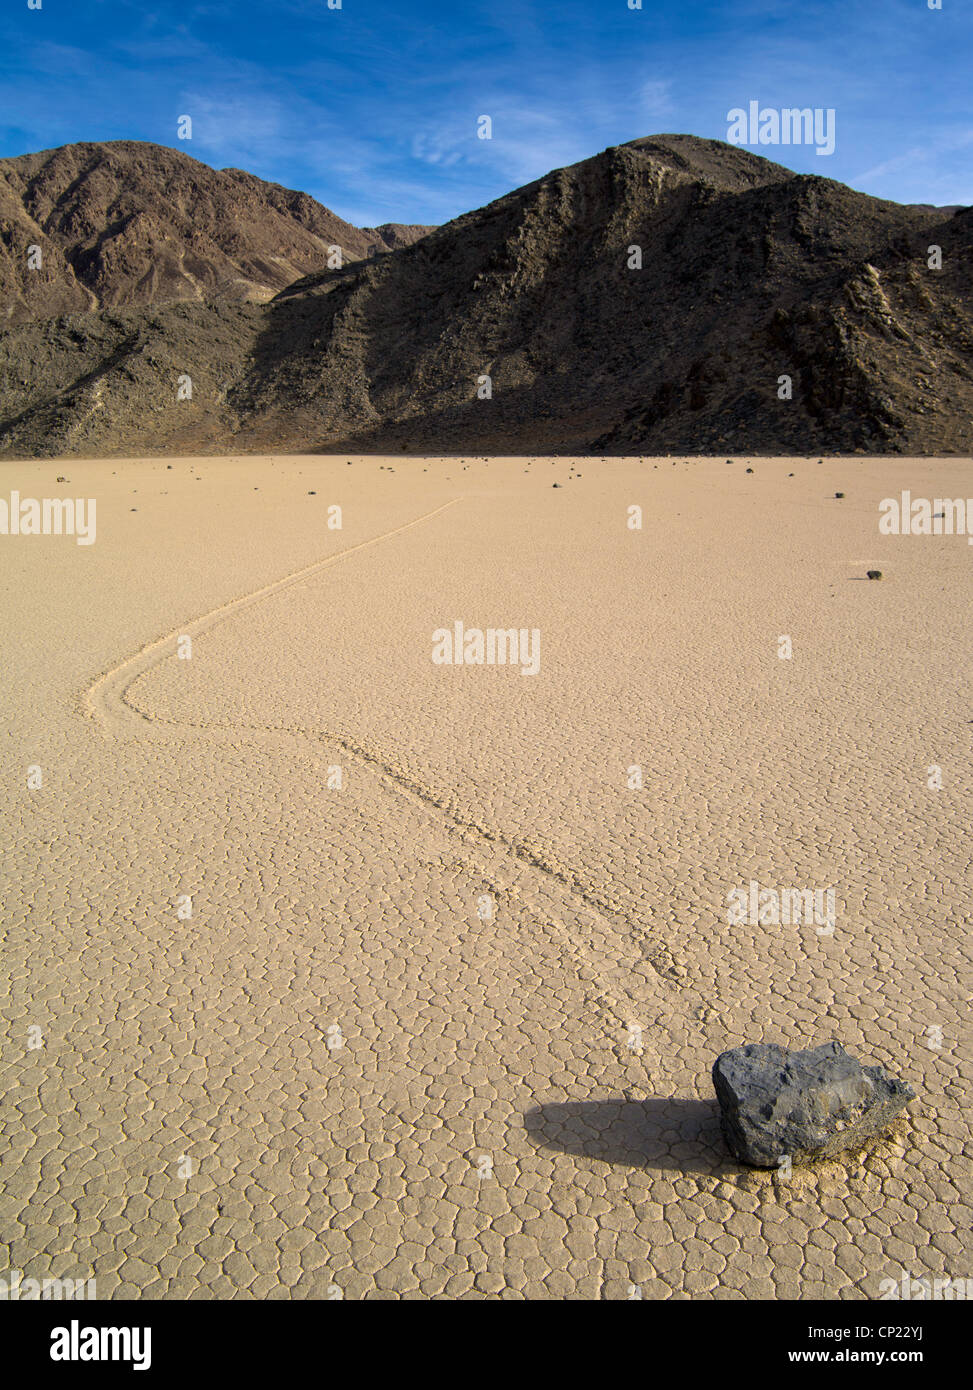 A sliding rock and it's track on the playa of Racetrack Valley, Death Valley National Park, California Stock Photo